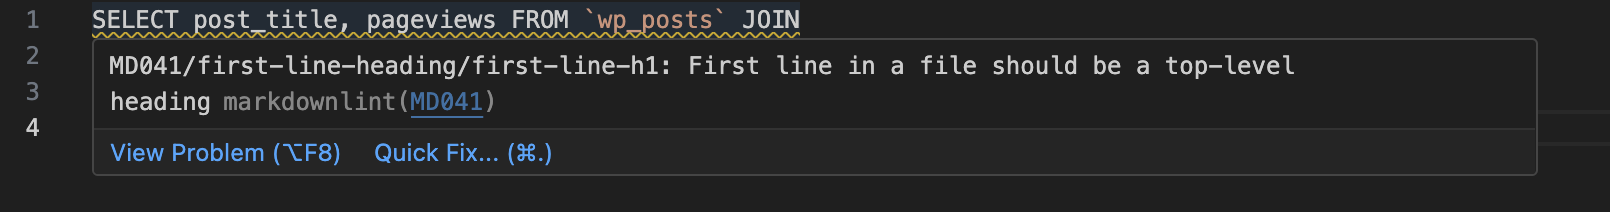 markdownlintでMD041/first-line-heading/first-line-h1: First line in a file should be a top-level heading